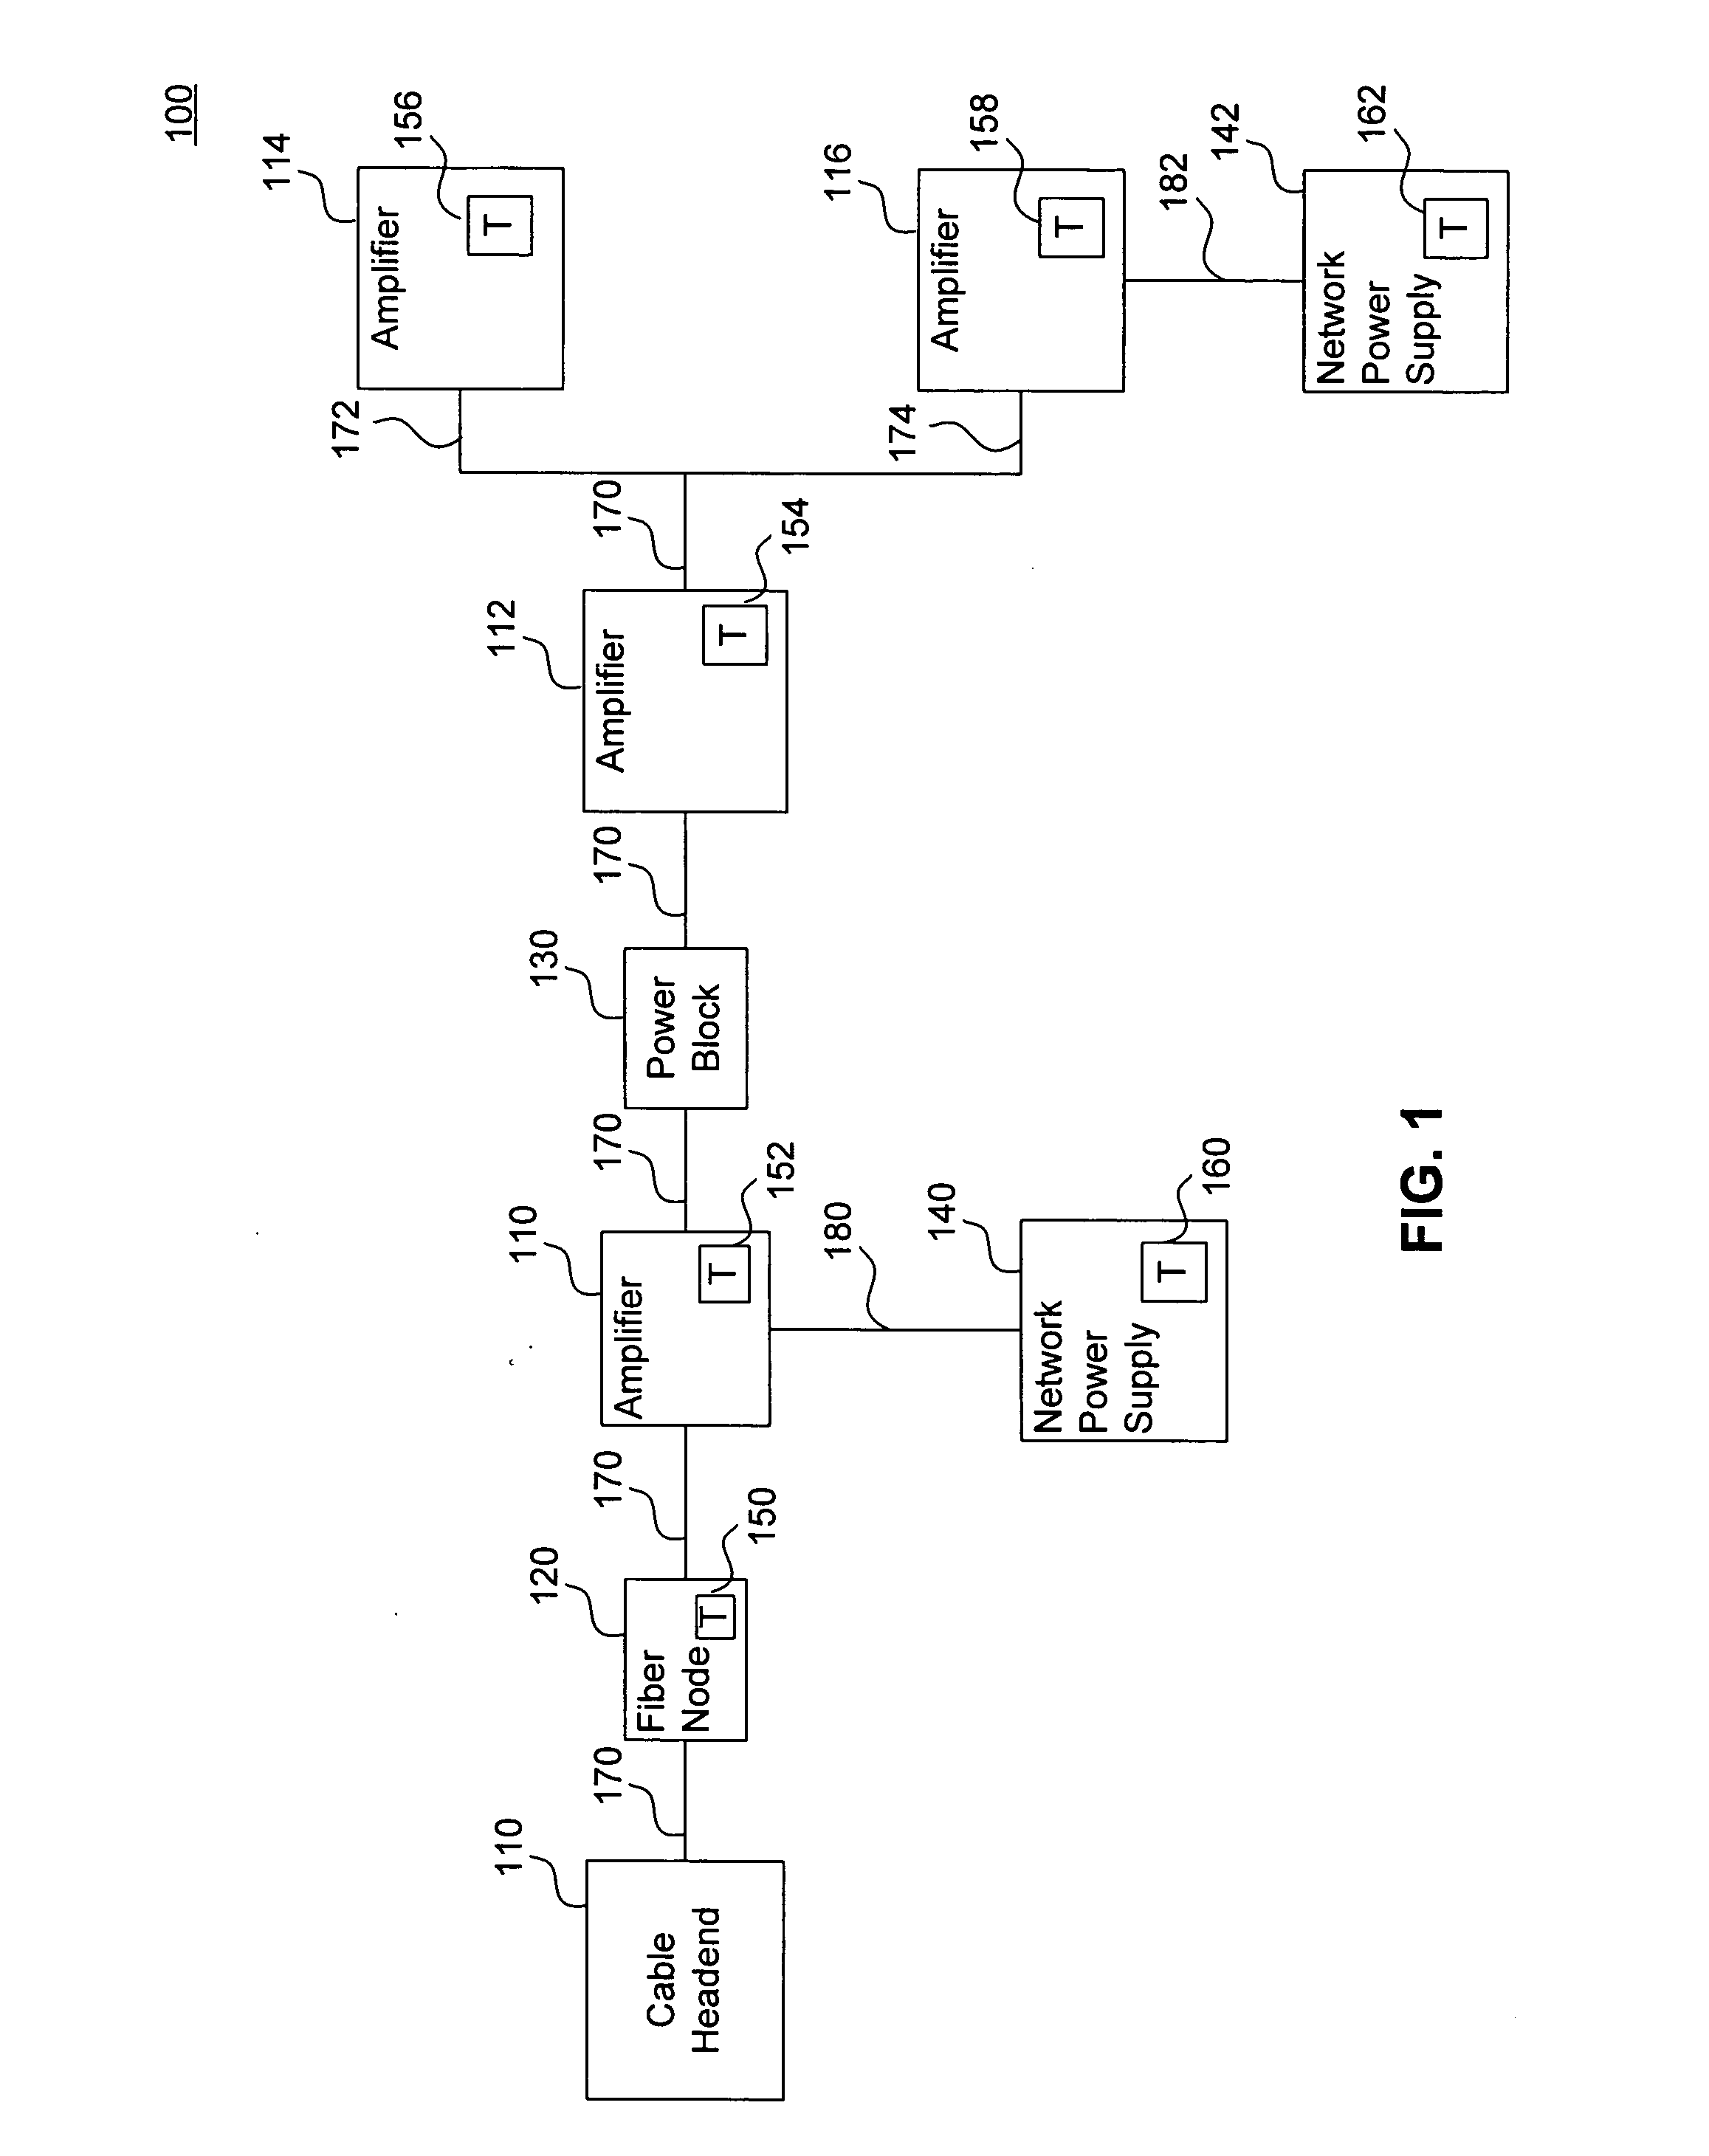 Apparatus, system, and methods for status monitoring and control of cable television network components